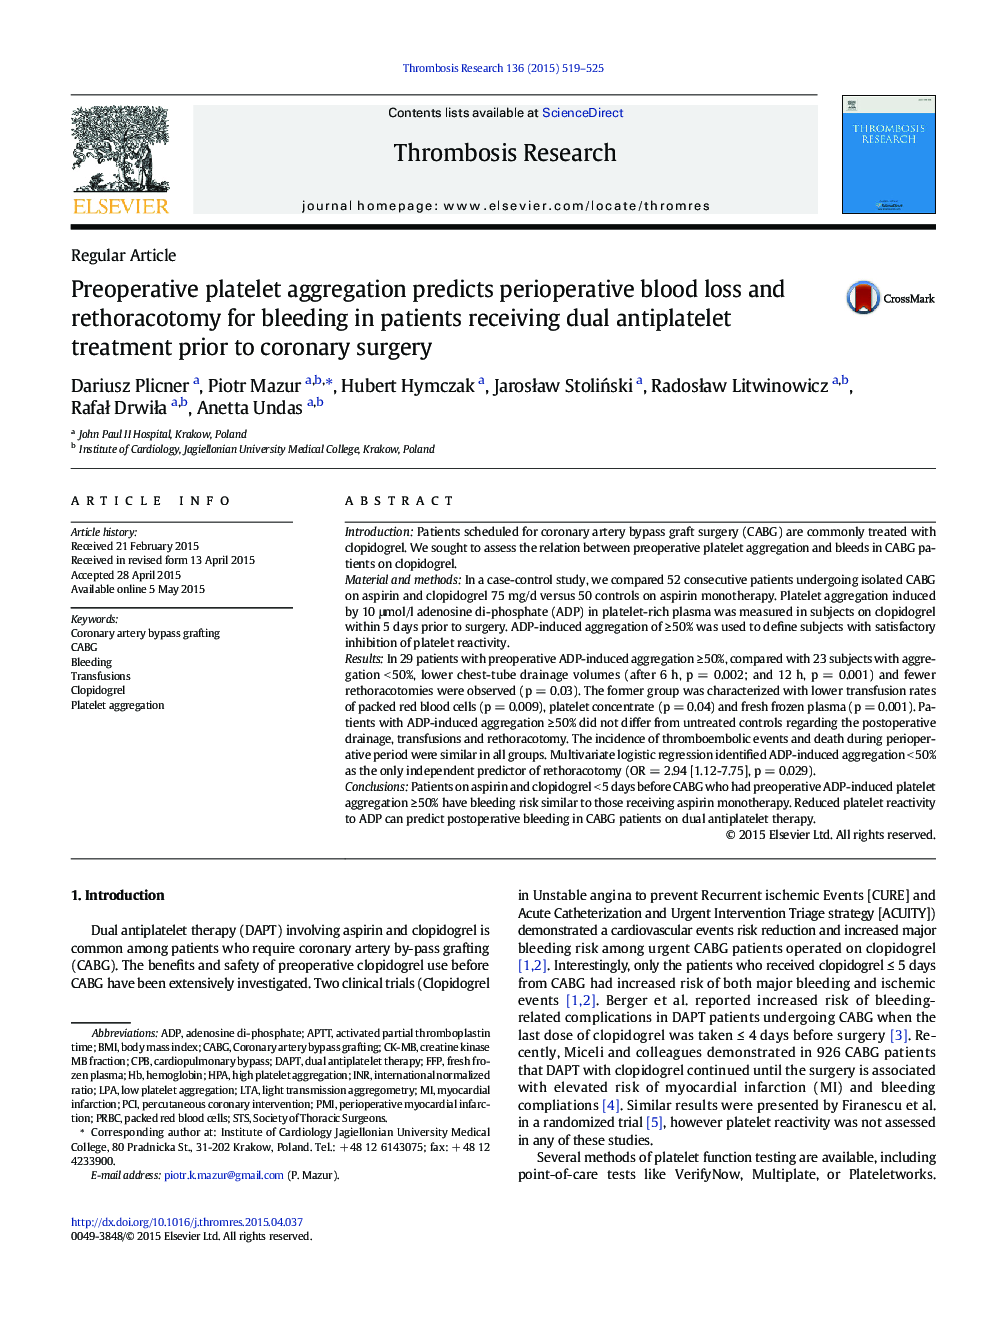 Preoperative platelet aggregation predicts perioperative blood loss and rethoracotomy for bleeding in patients receiving dual antiplatelet treatment prior to coronary surgery